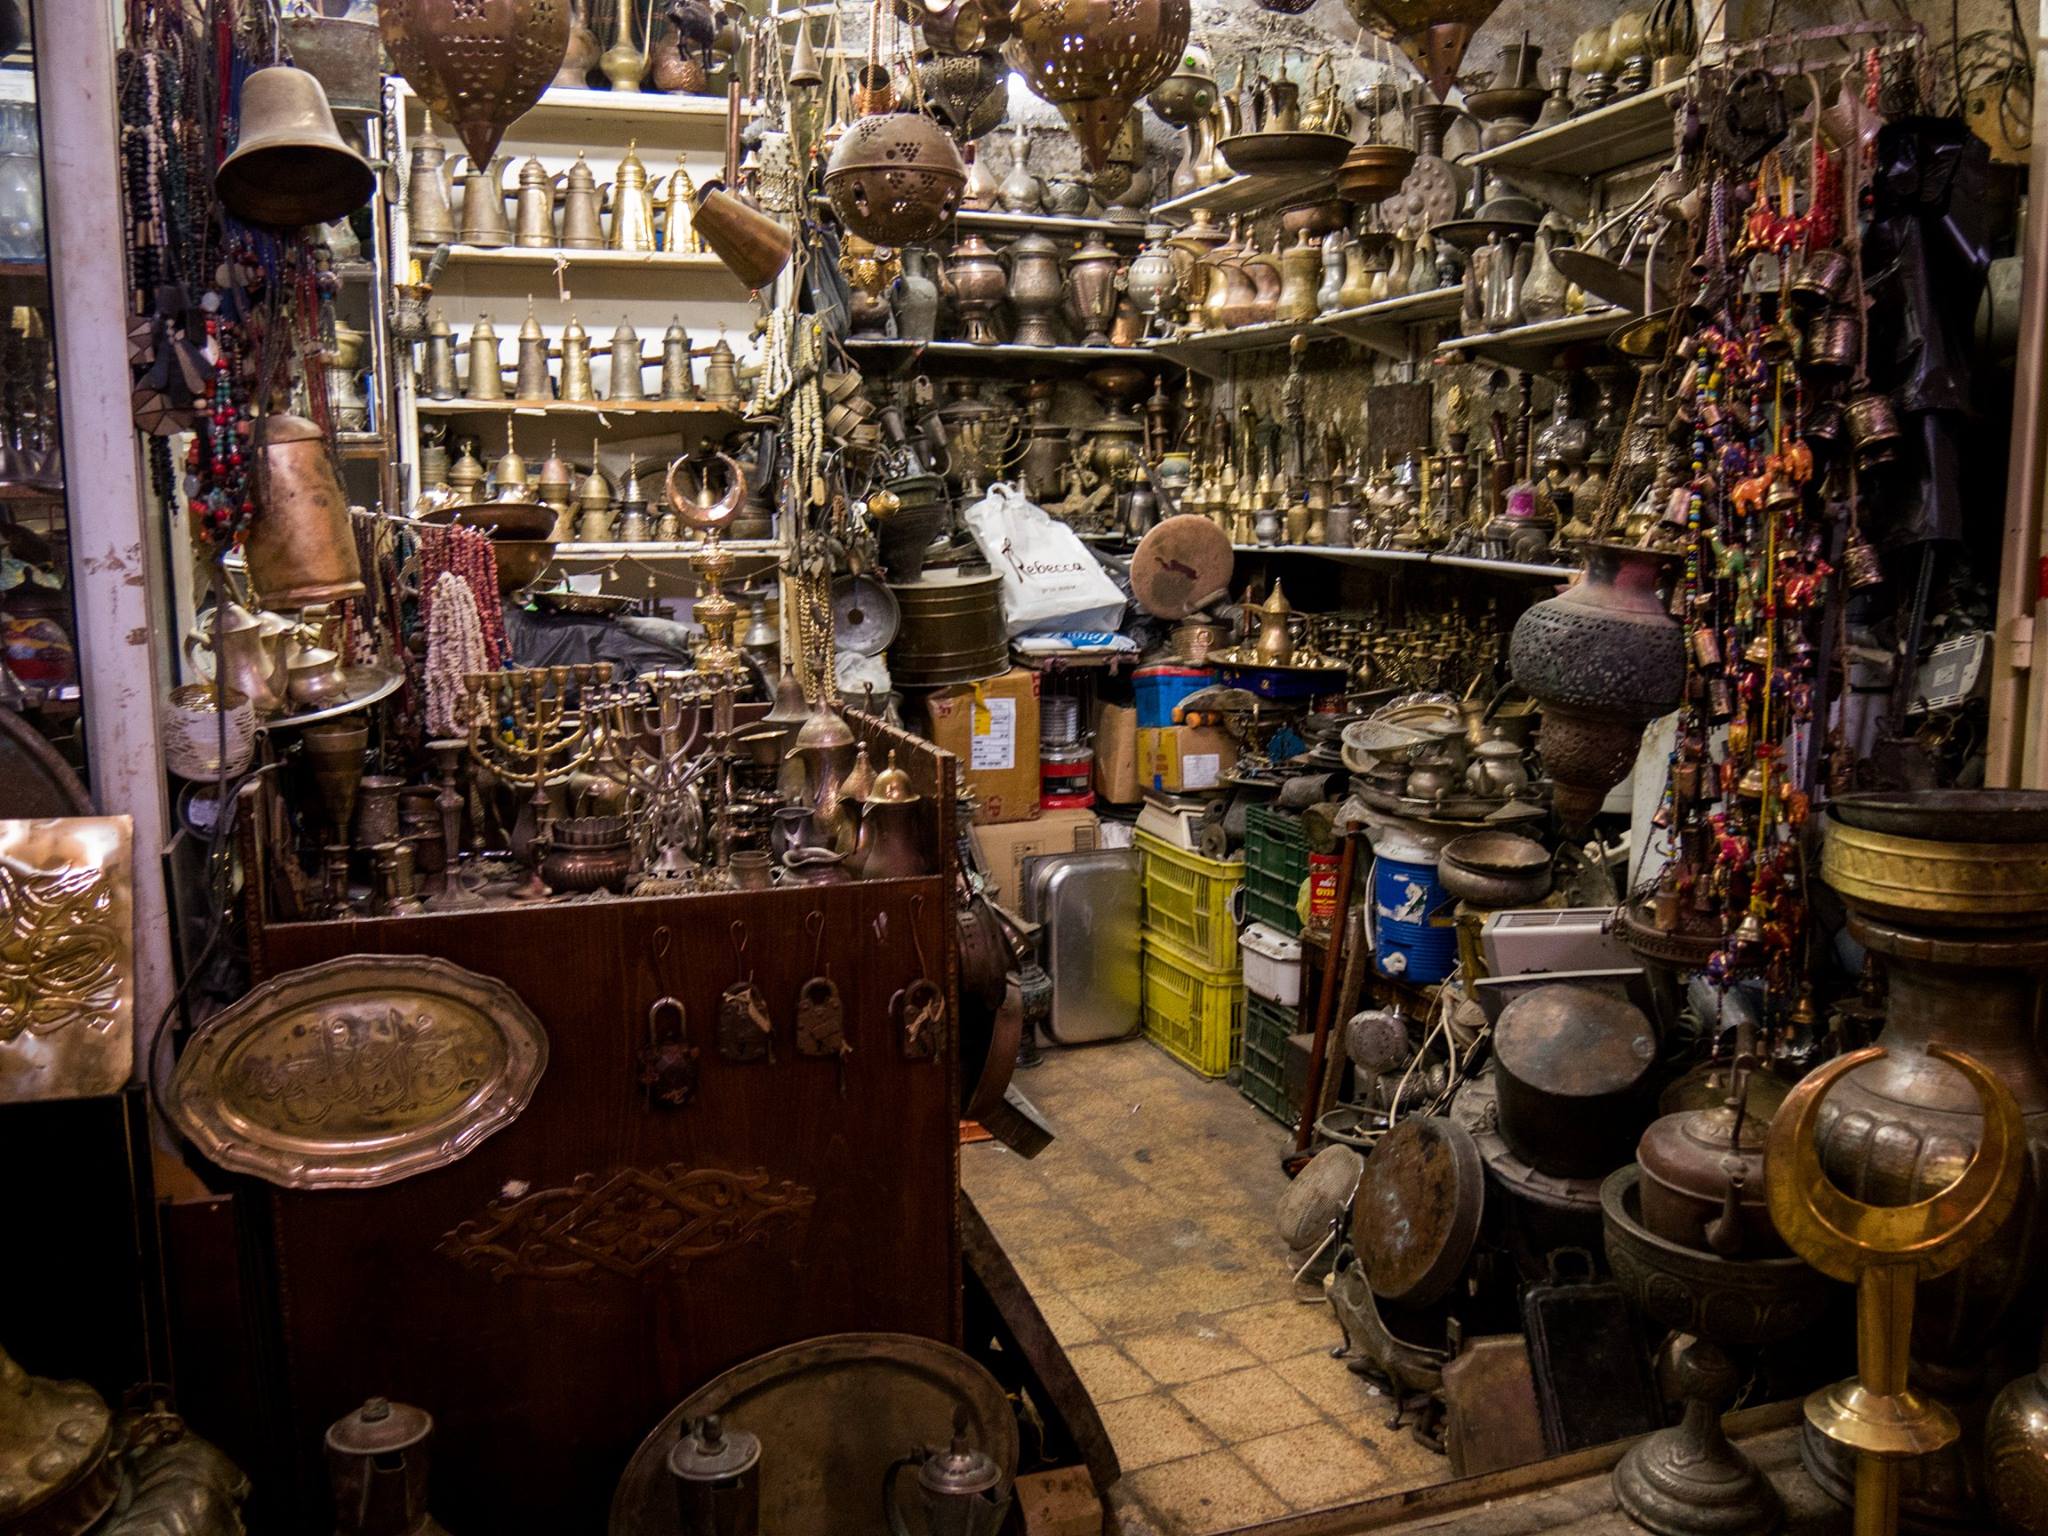 Antique shop in the covered alleyway of Jerusalem Old City Market